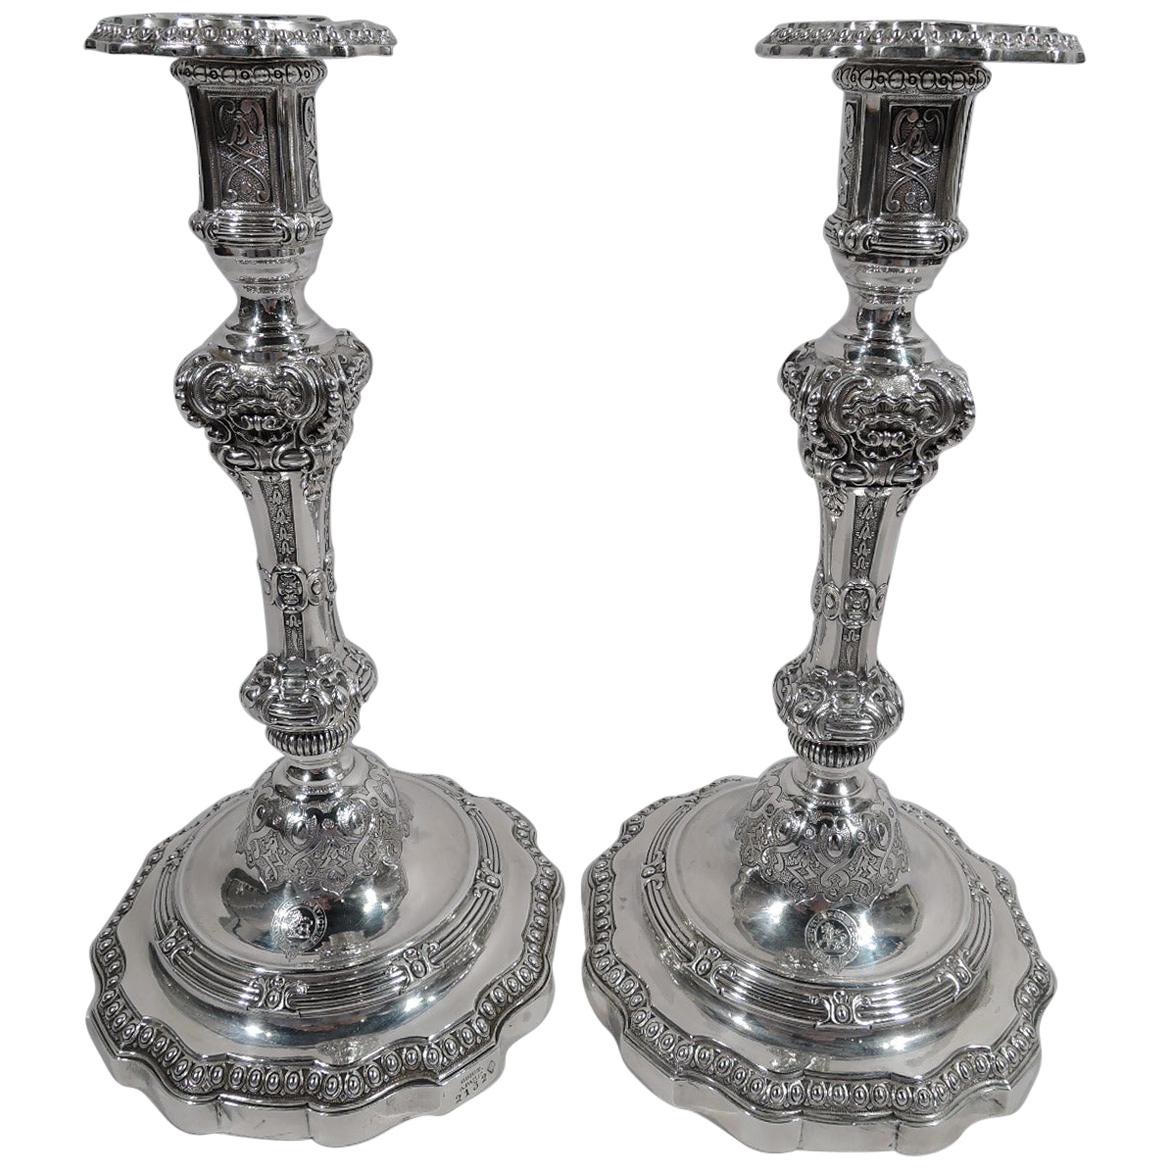 Pair of Sumptuous French Classical Silver Candlesticks by Odiot